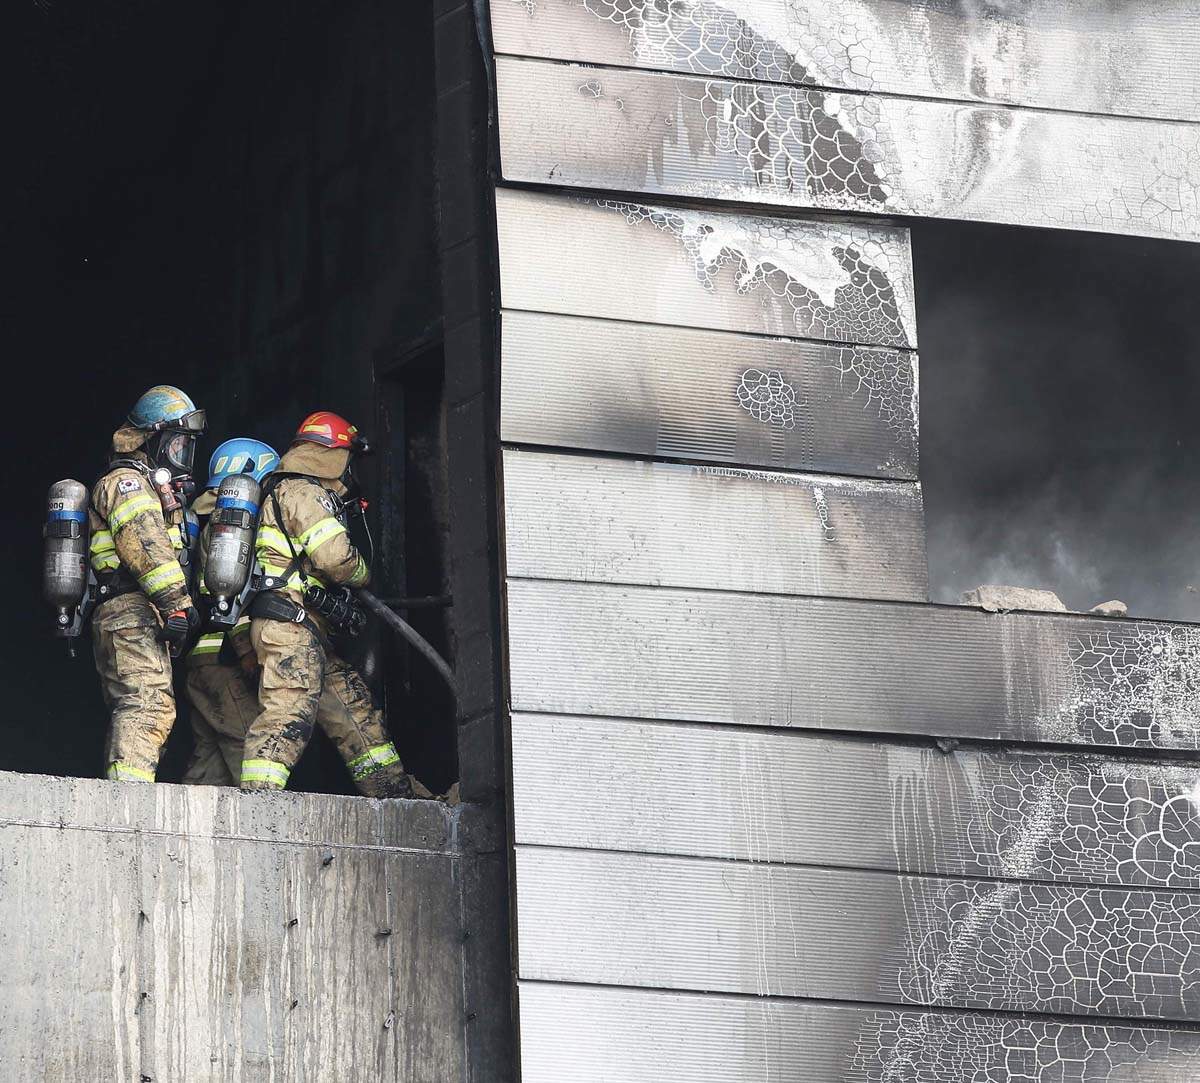 These shocking pictures of brave firefighters risking their lives will send a chill down your spine